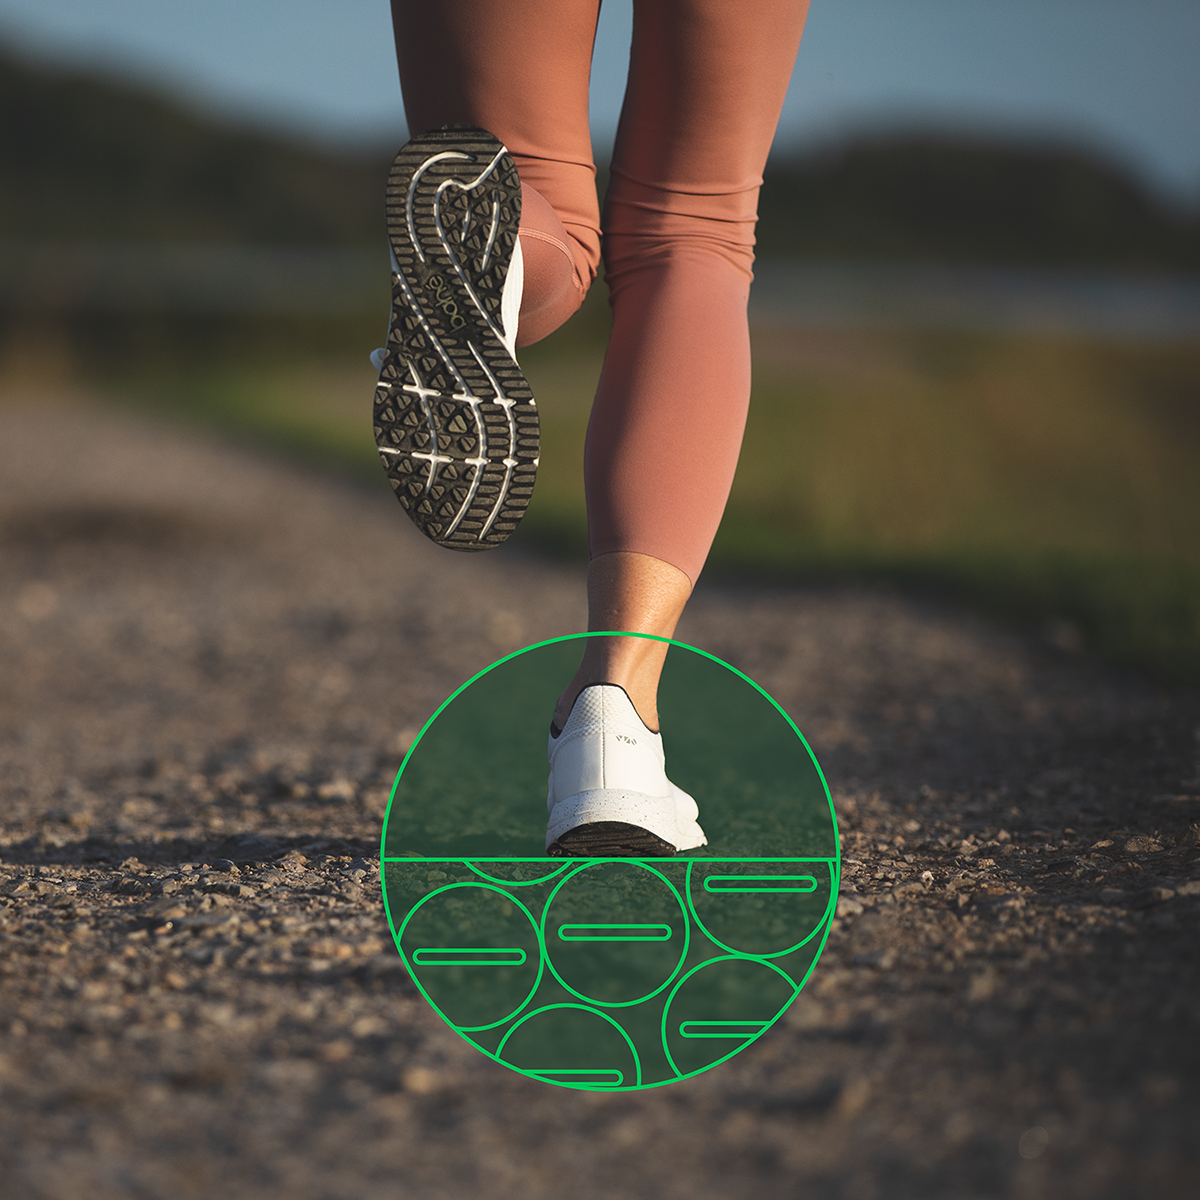 graphic overlay o image of woman running showing bahé grounding shoes conducting electrons from earth